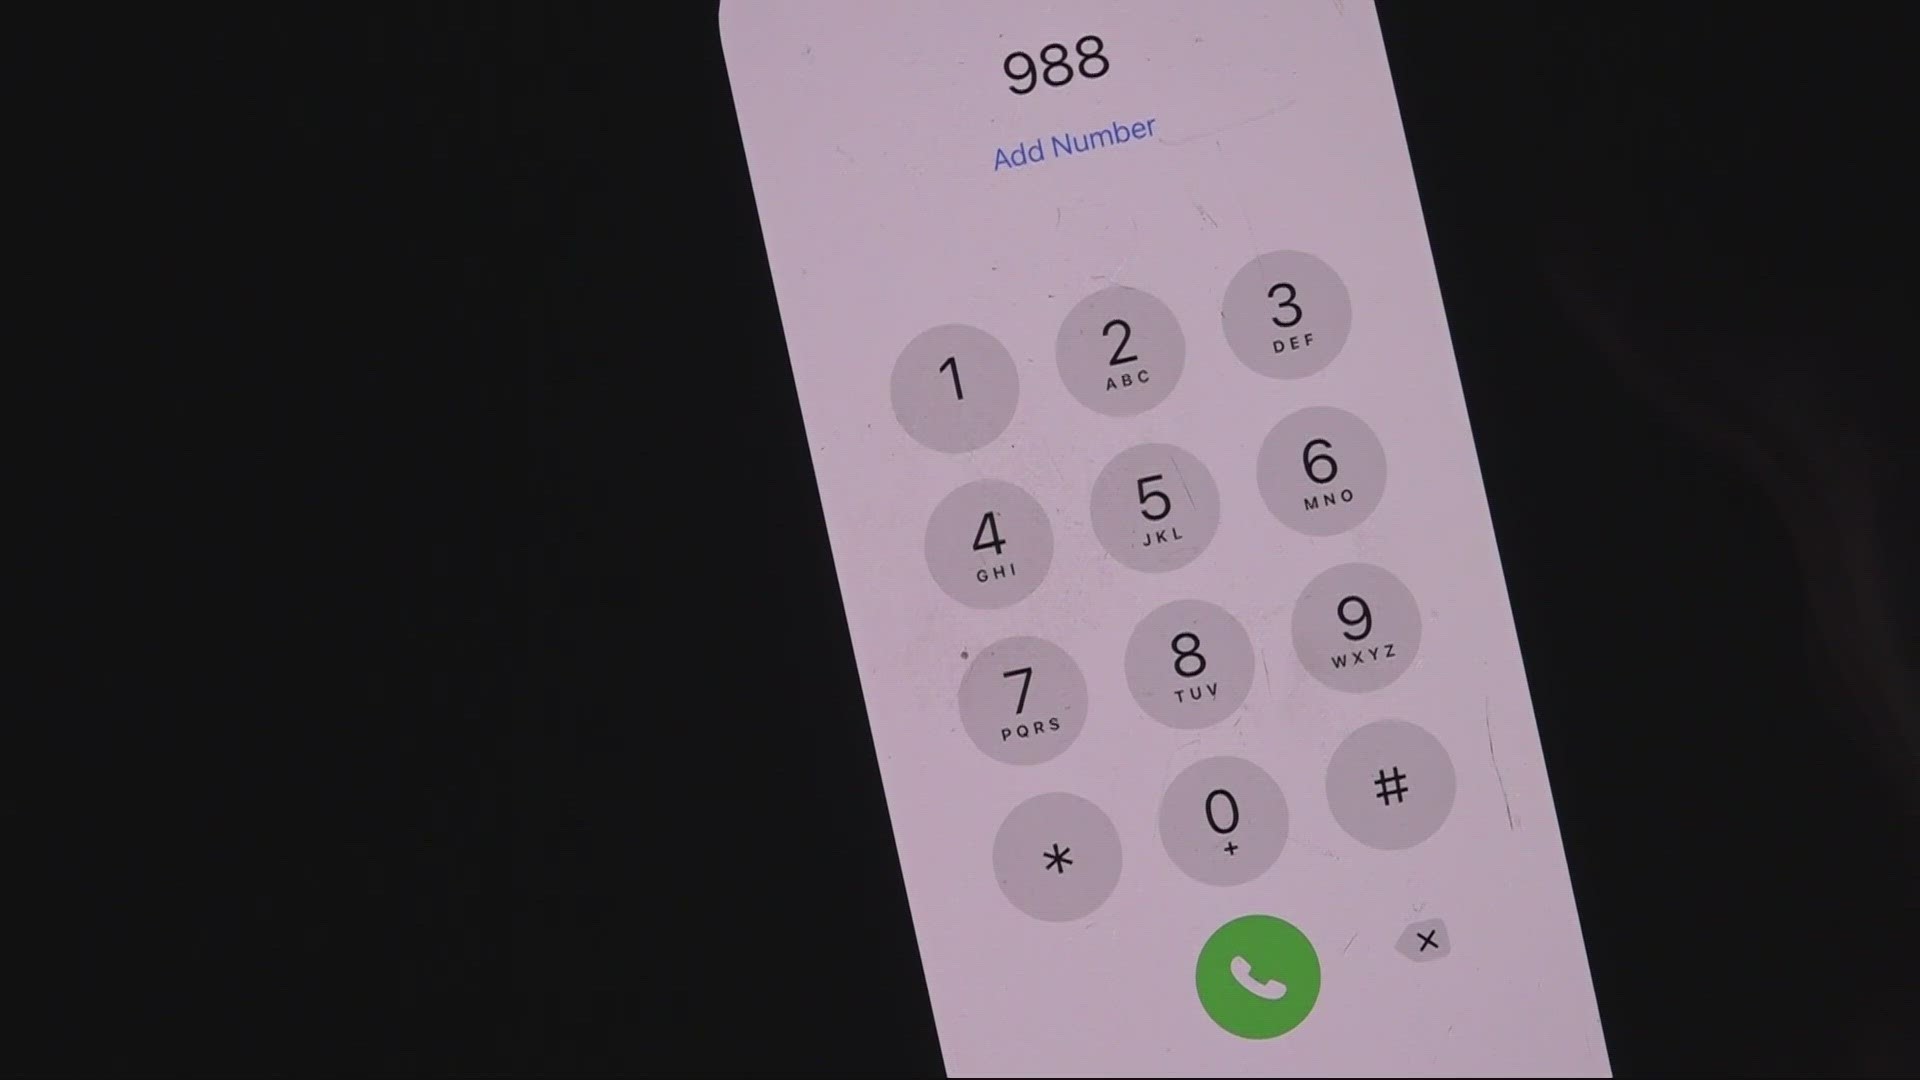 One year since it's launch, the 988 suicide and crisis lifeline is receiving up to 50 calls a day in Northeast Florida, according to the director.